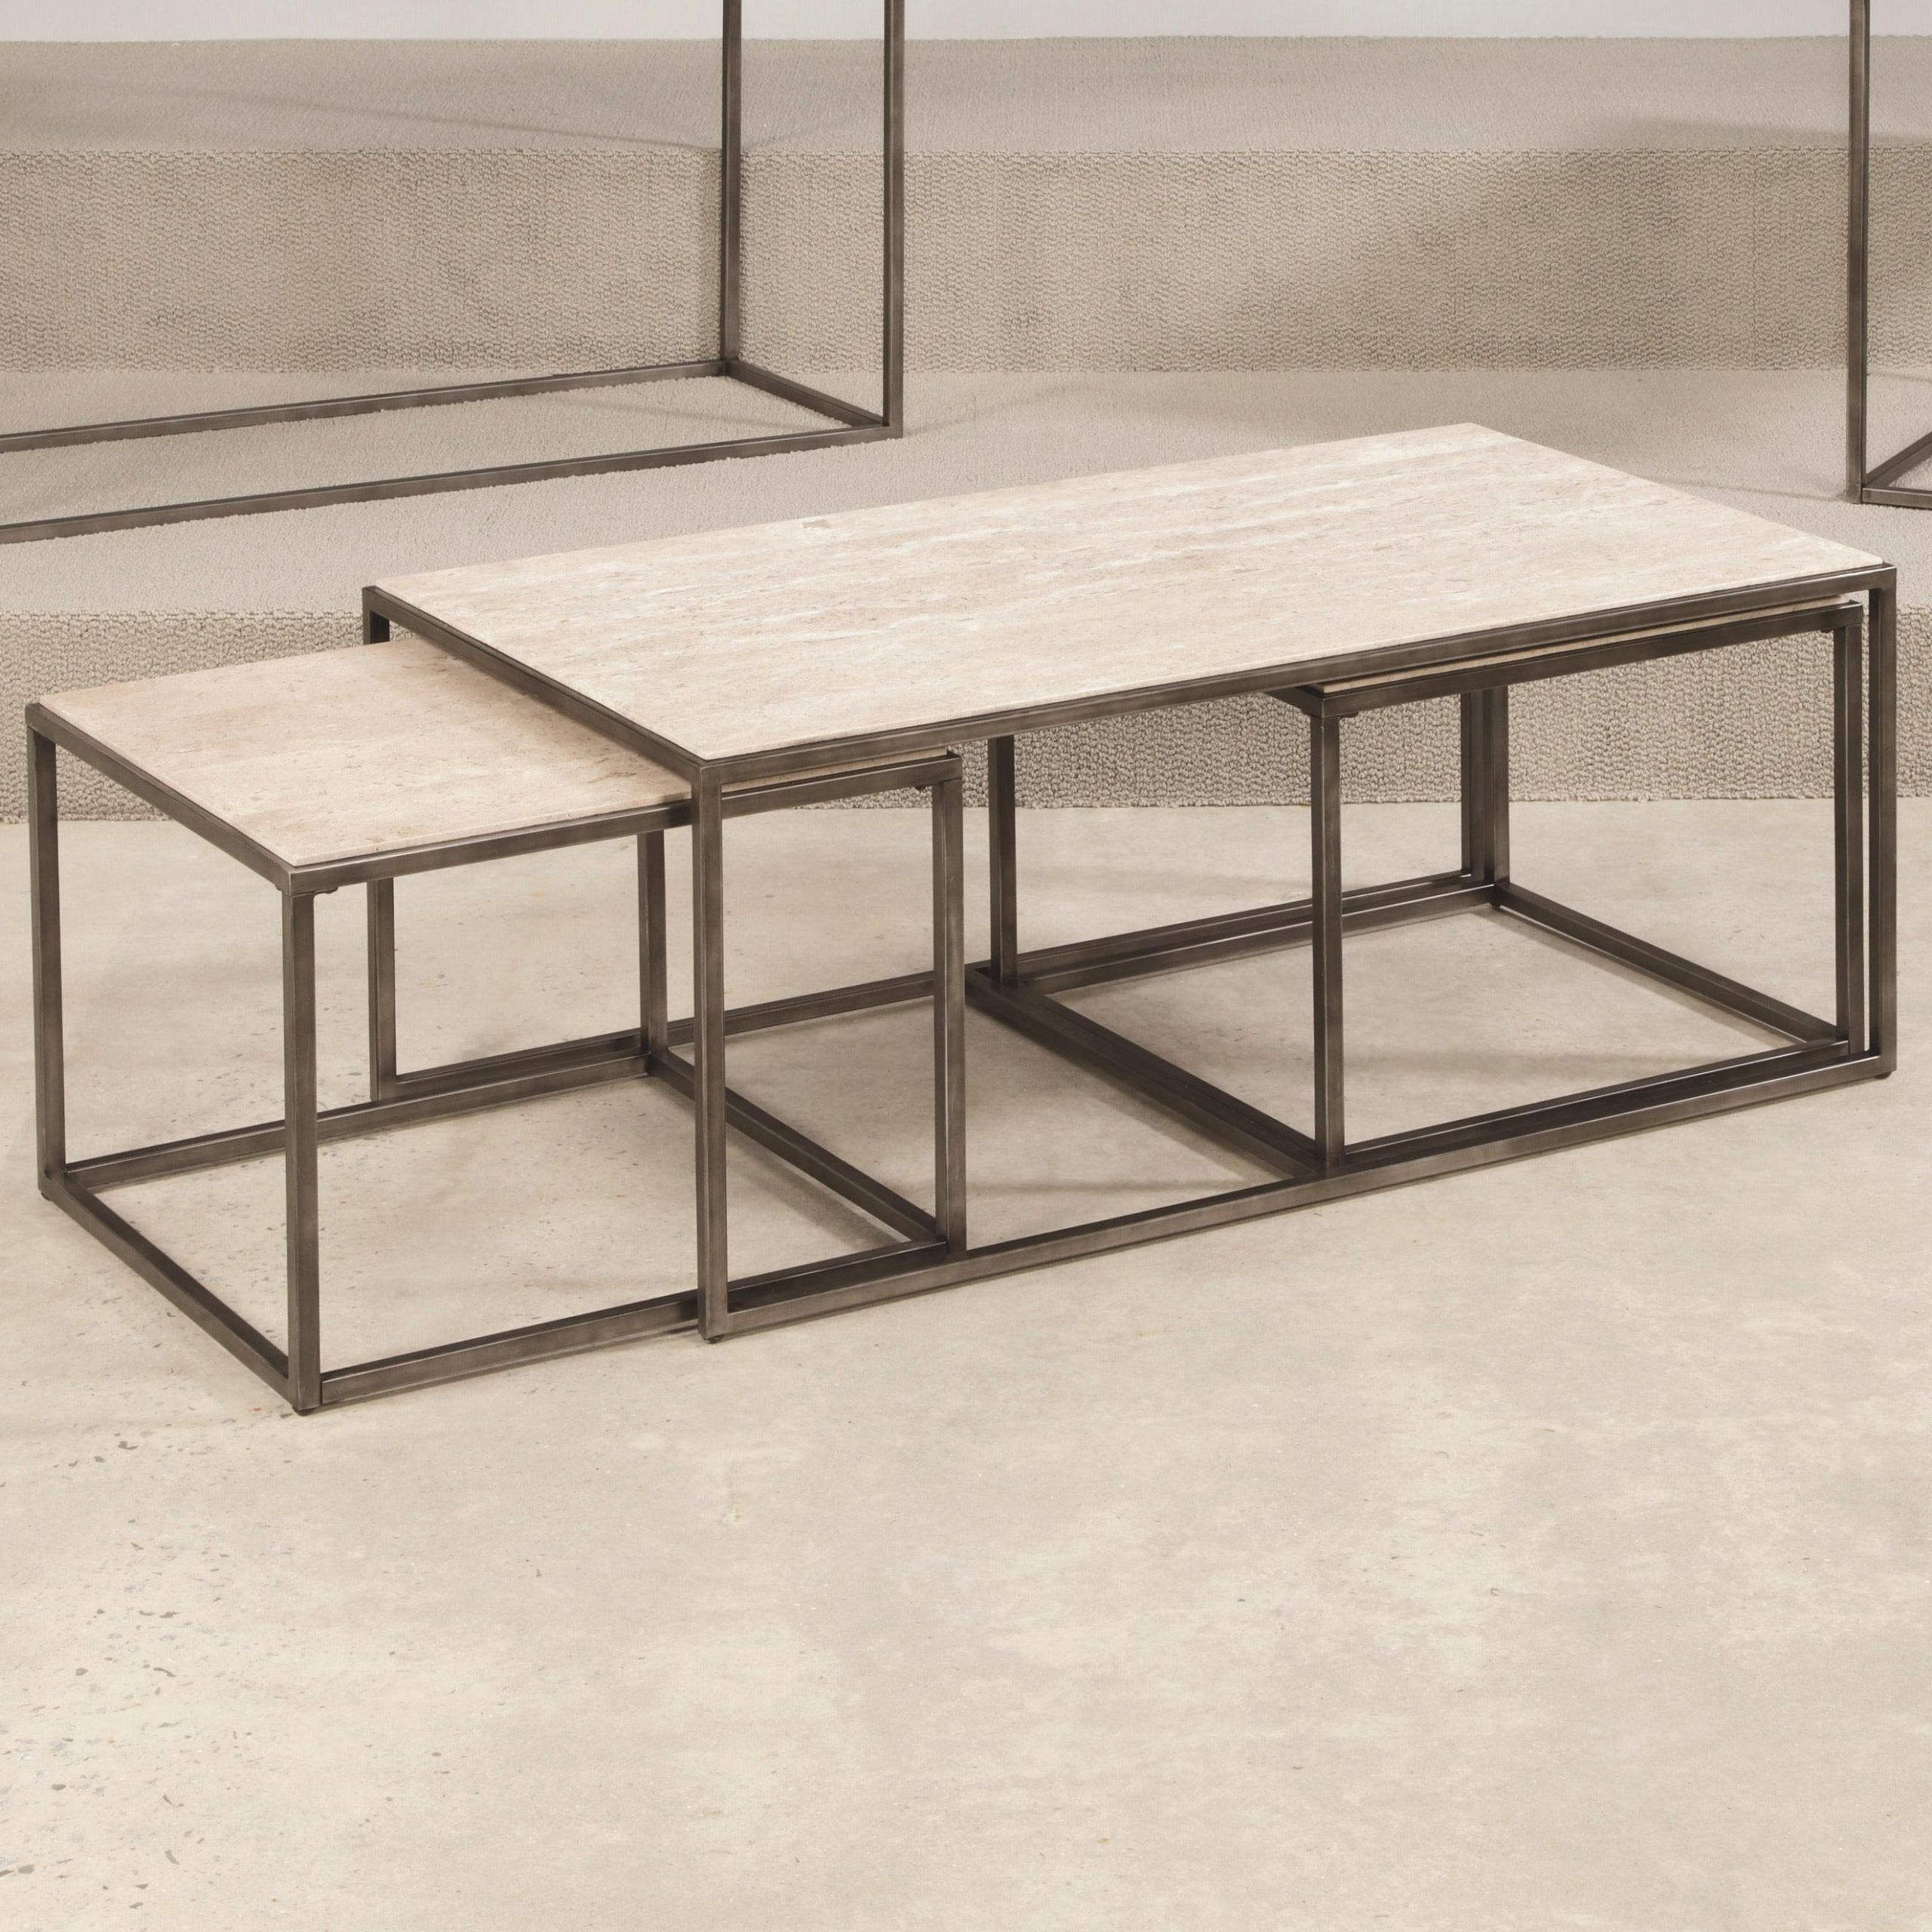 Preferred Nesting Cocktail Tables Pertaining To Hammary Modern Basics Rectangular Cocktail Table With (View 13 of 20)